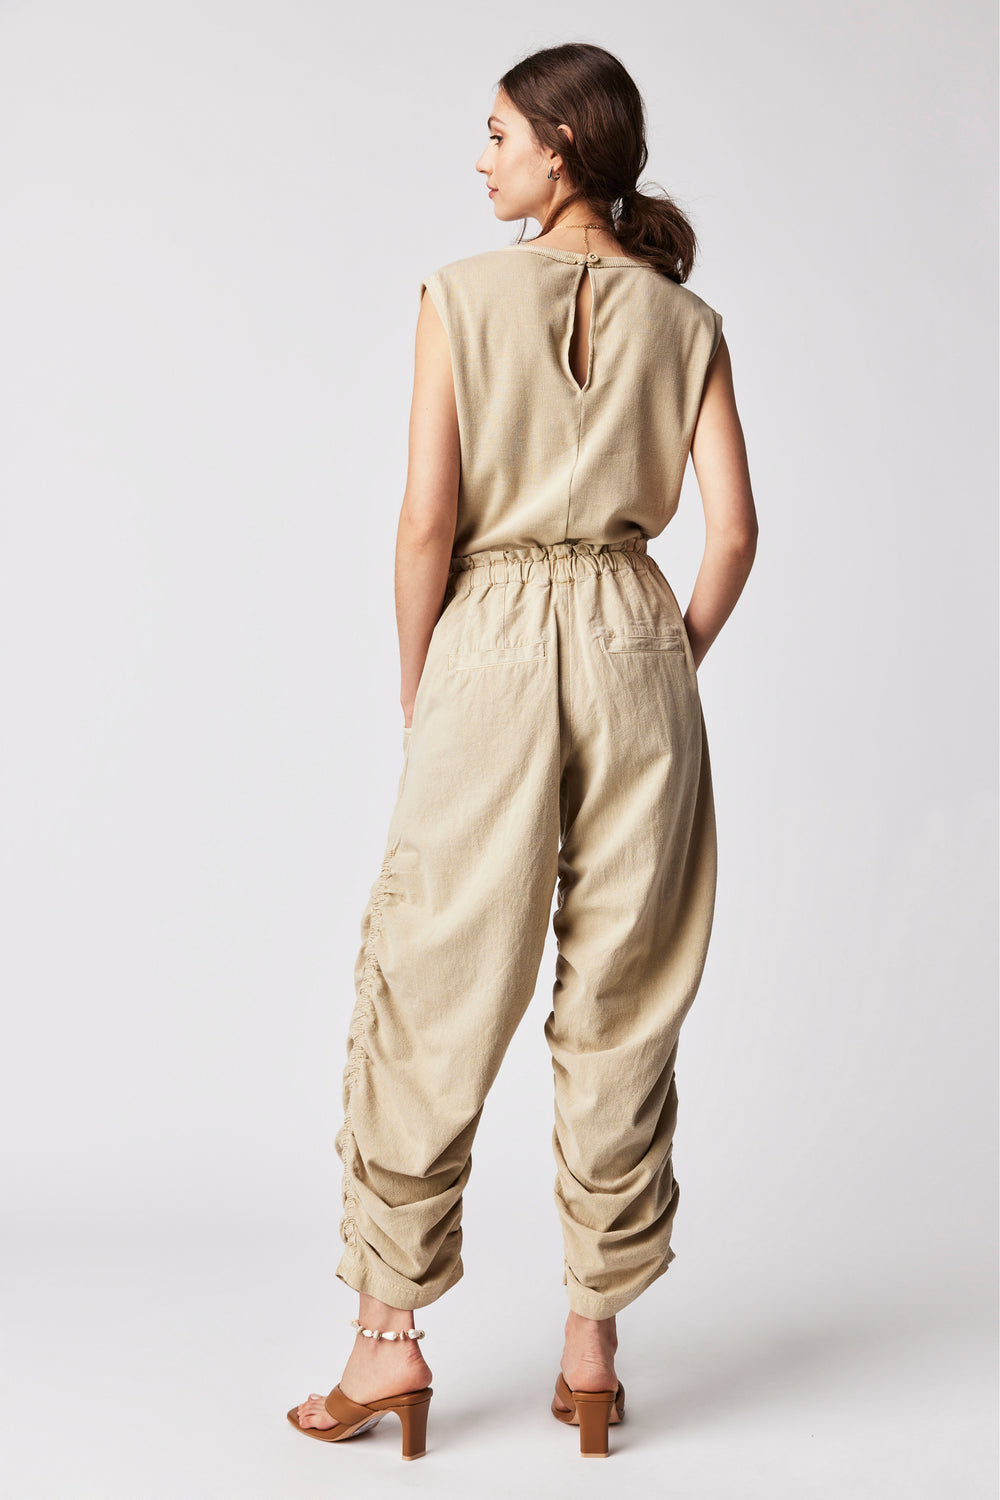 Rock your wardrobe game with this chic, funky one-piece jumpsuit from Free People! Styled with tank sleeves, ruched sides, drawstring, and pockets, this look is the perfect mix of style and comfort. So grab it, show some Sand Jam attitude, and hit the streets!